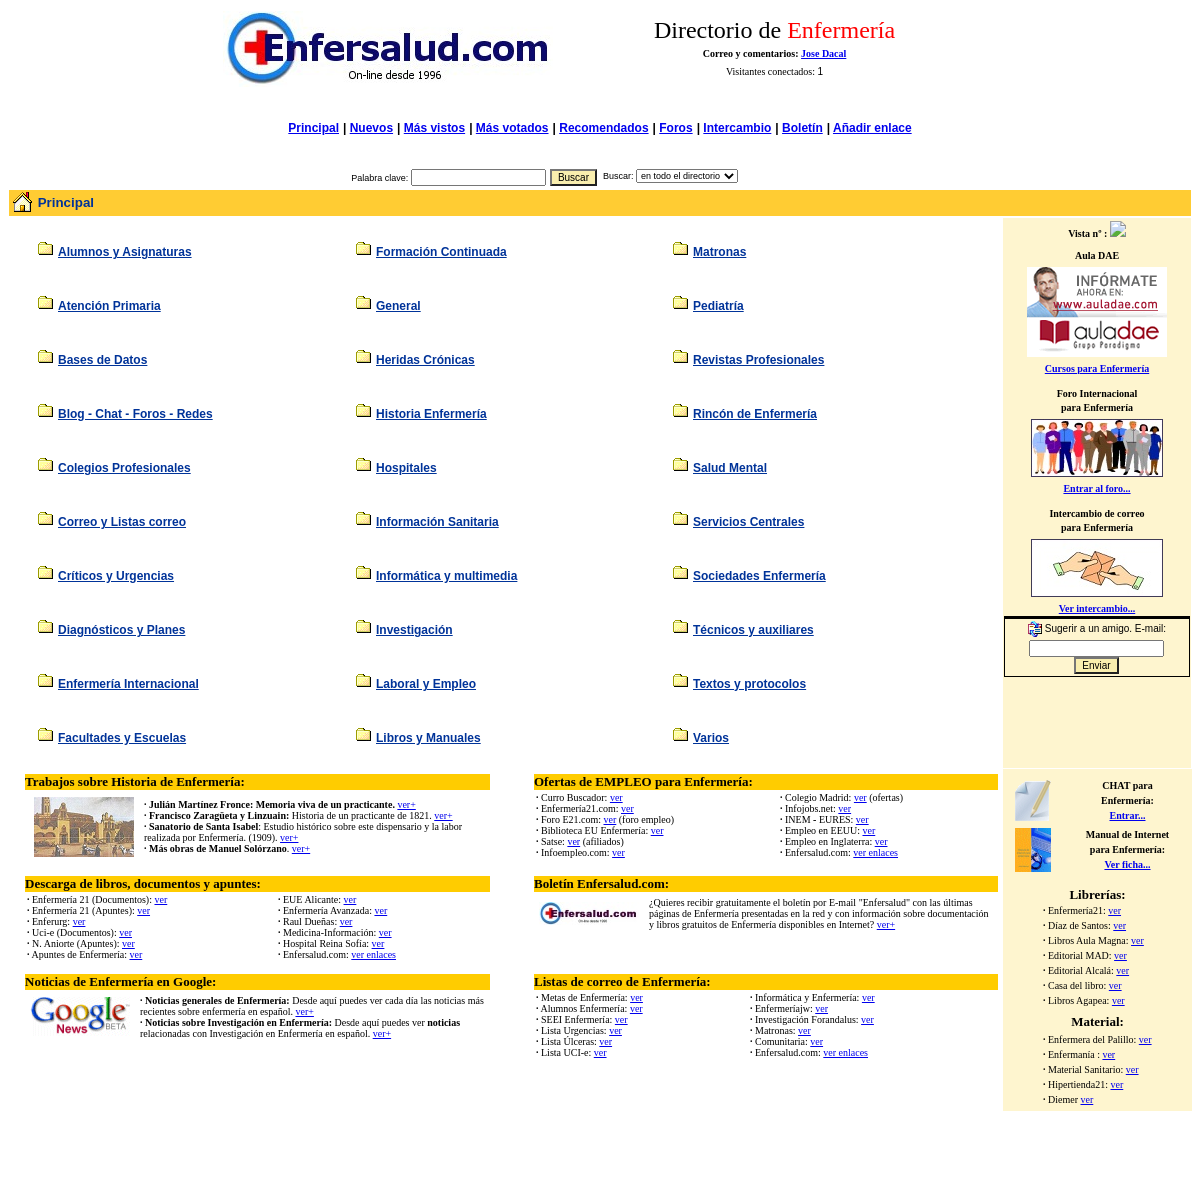 A complete backup of enfersalud.com